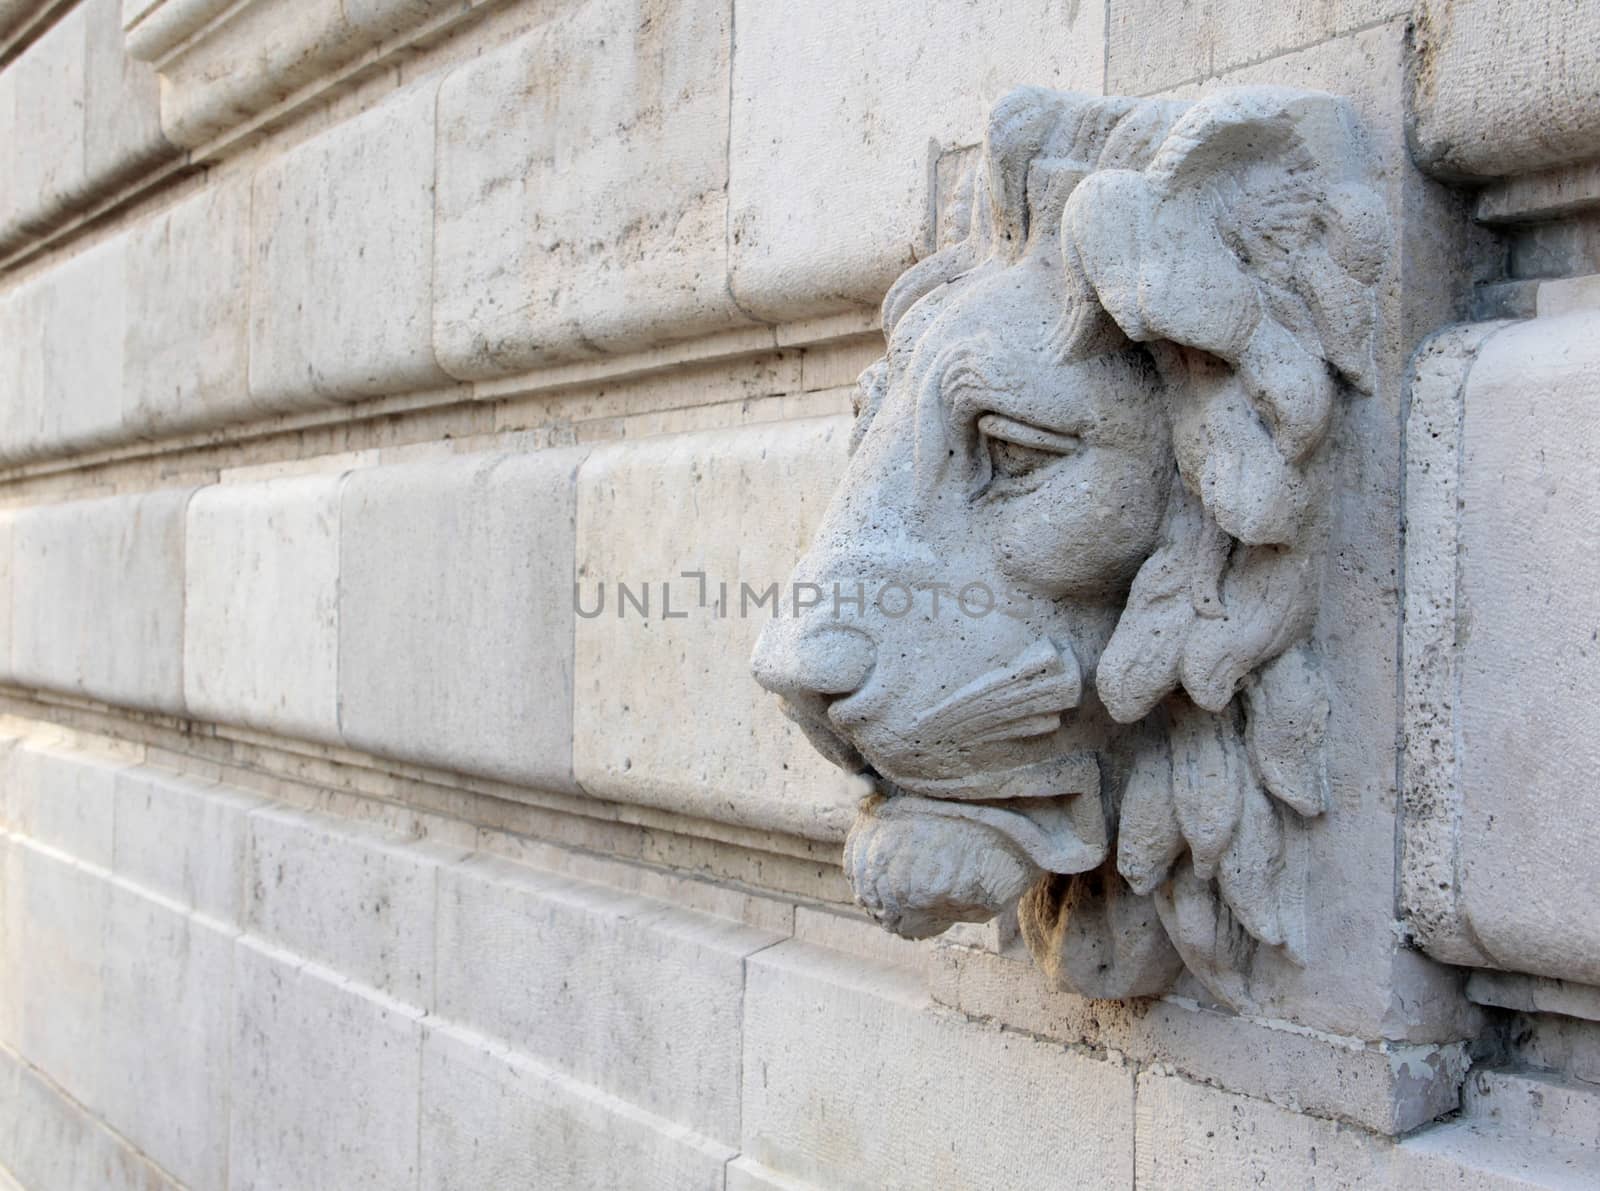 Renaissance building decorated stone lion in the Buda Castle.